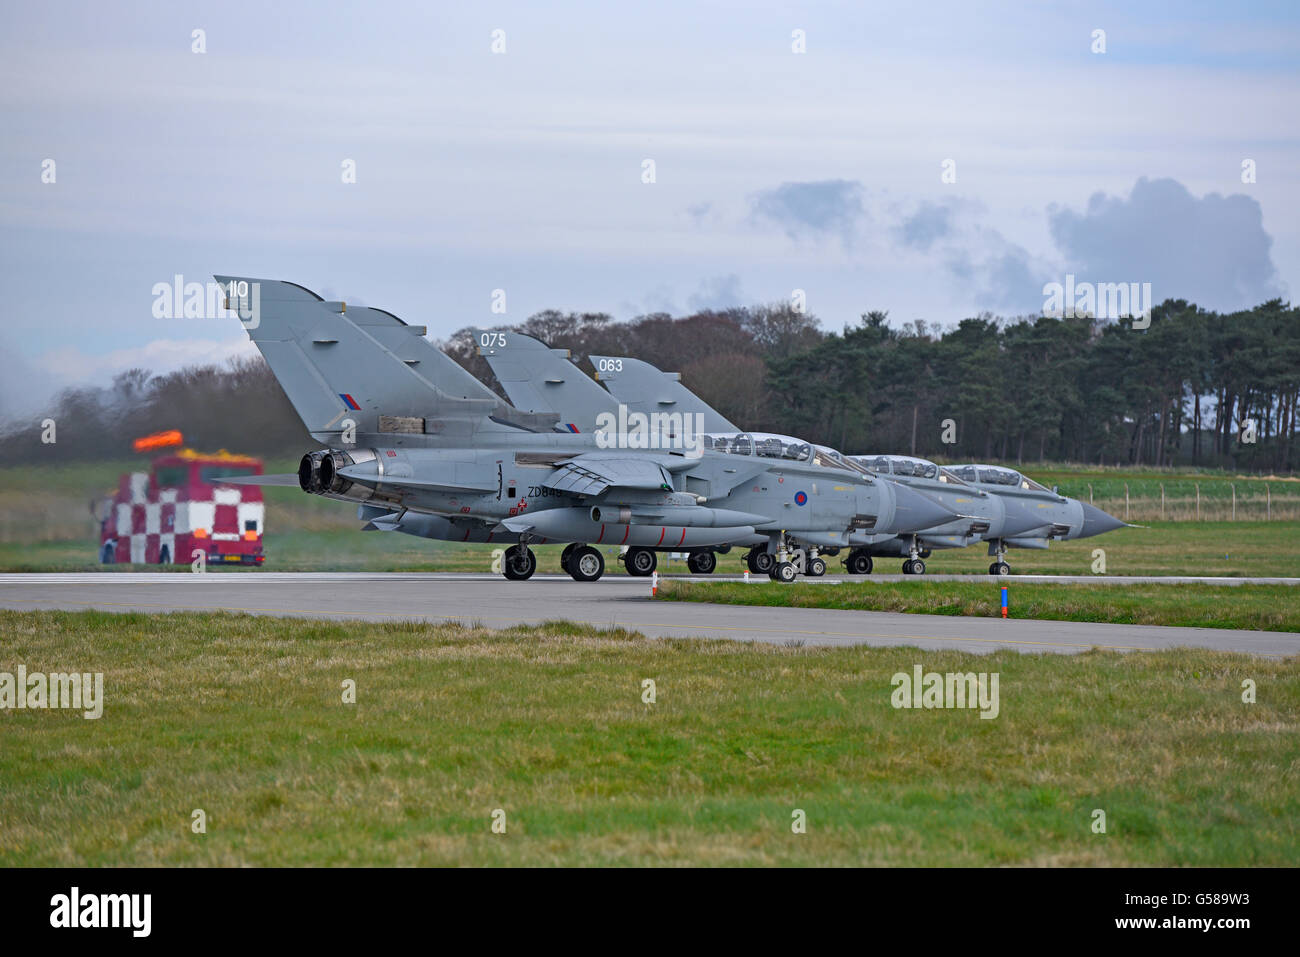 Lined up and ready for take off, four RAF GR4 Tornadoes at Lossiemouth Air Station Moray Scotland.  SCO 10,526. Stock Photo